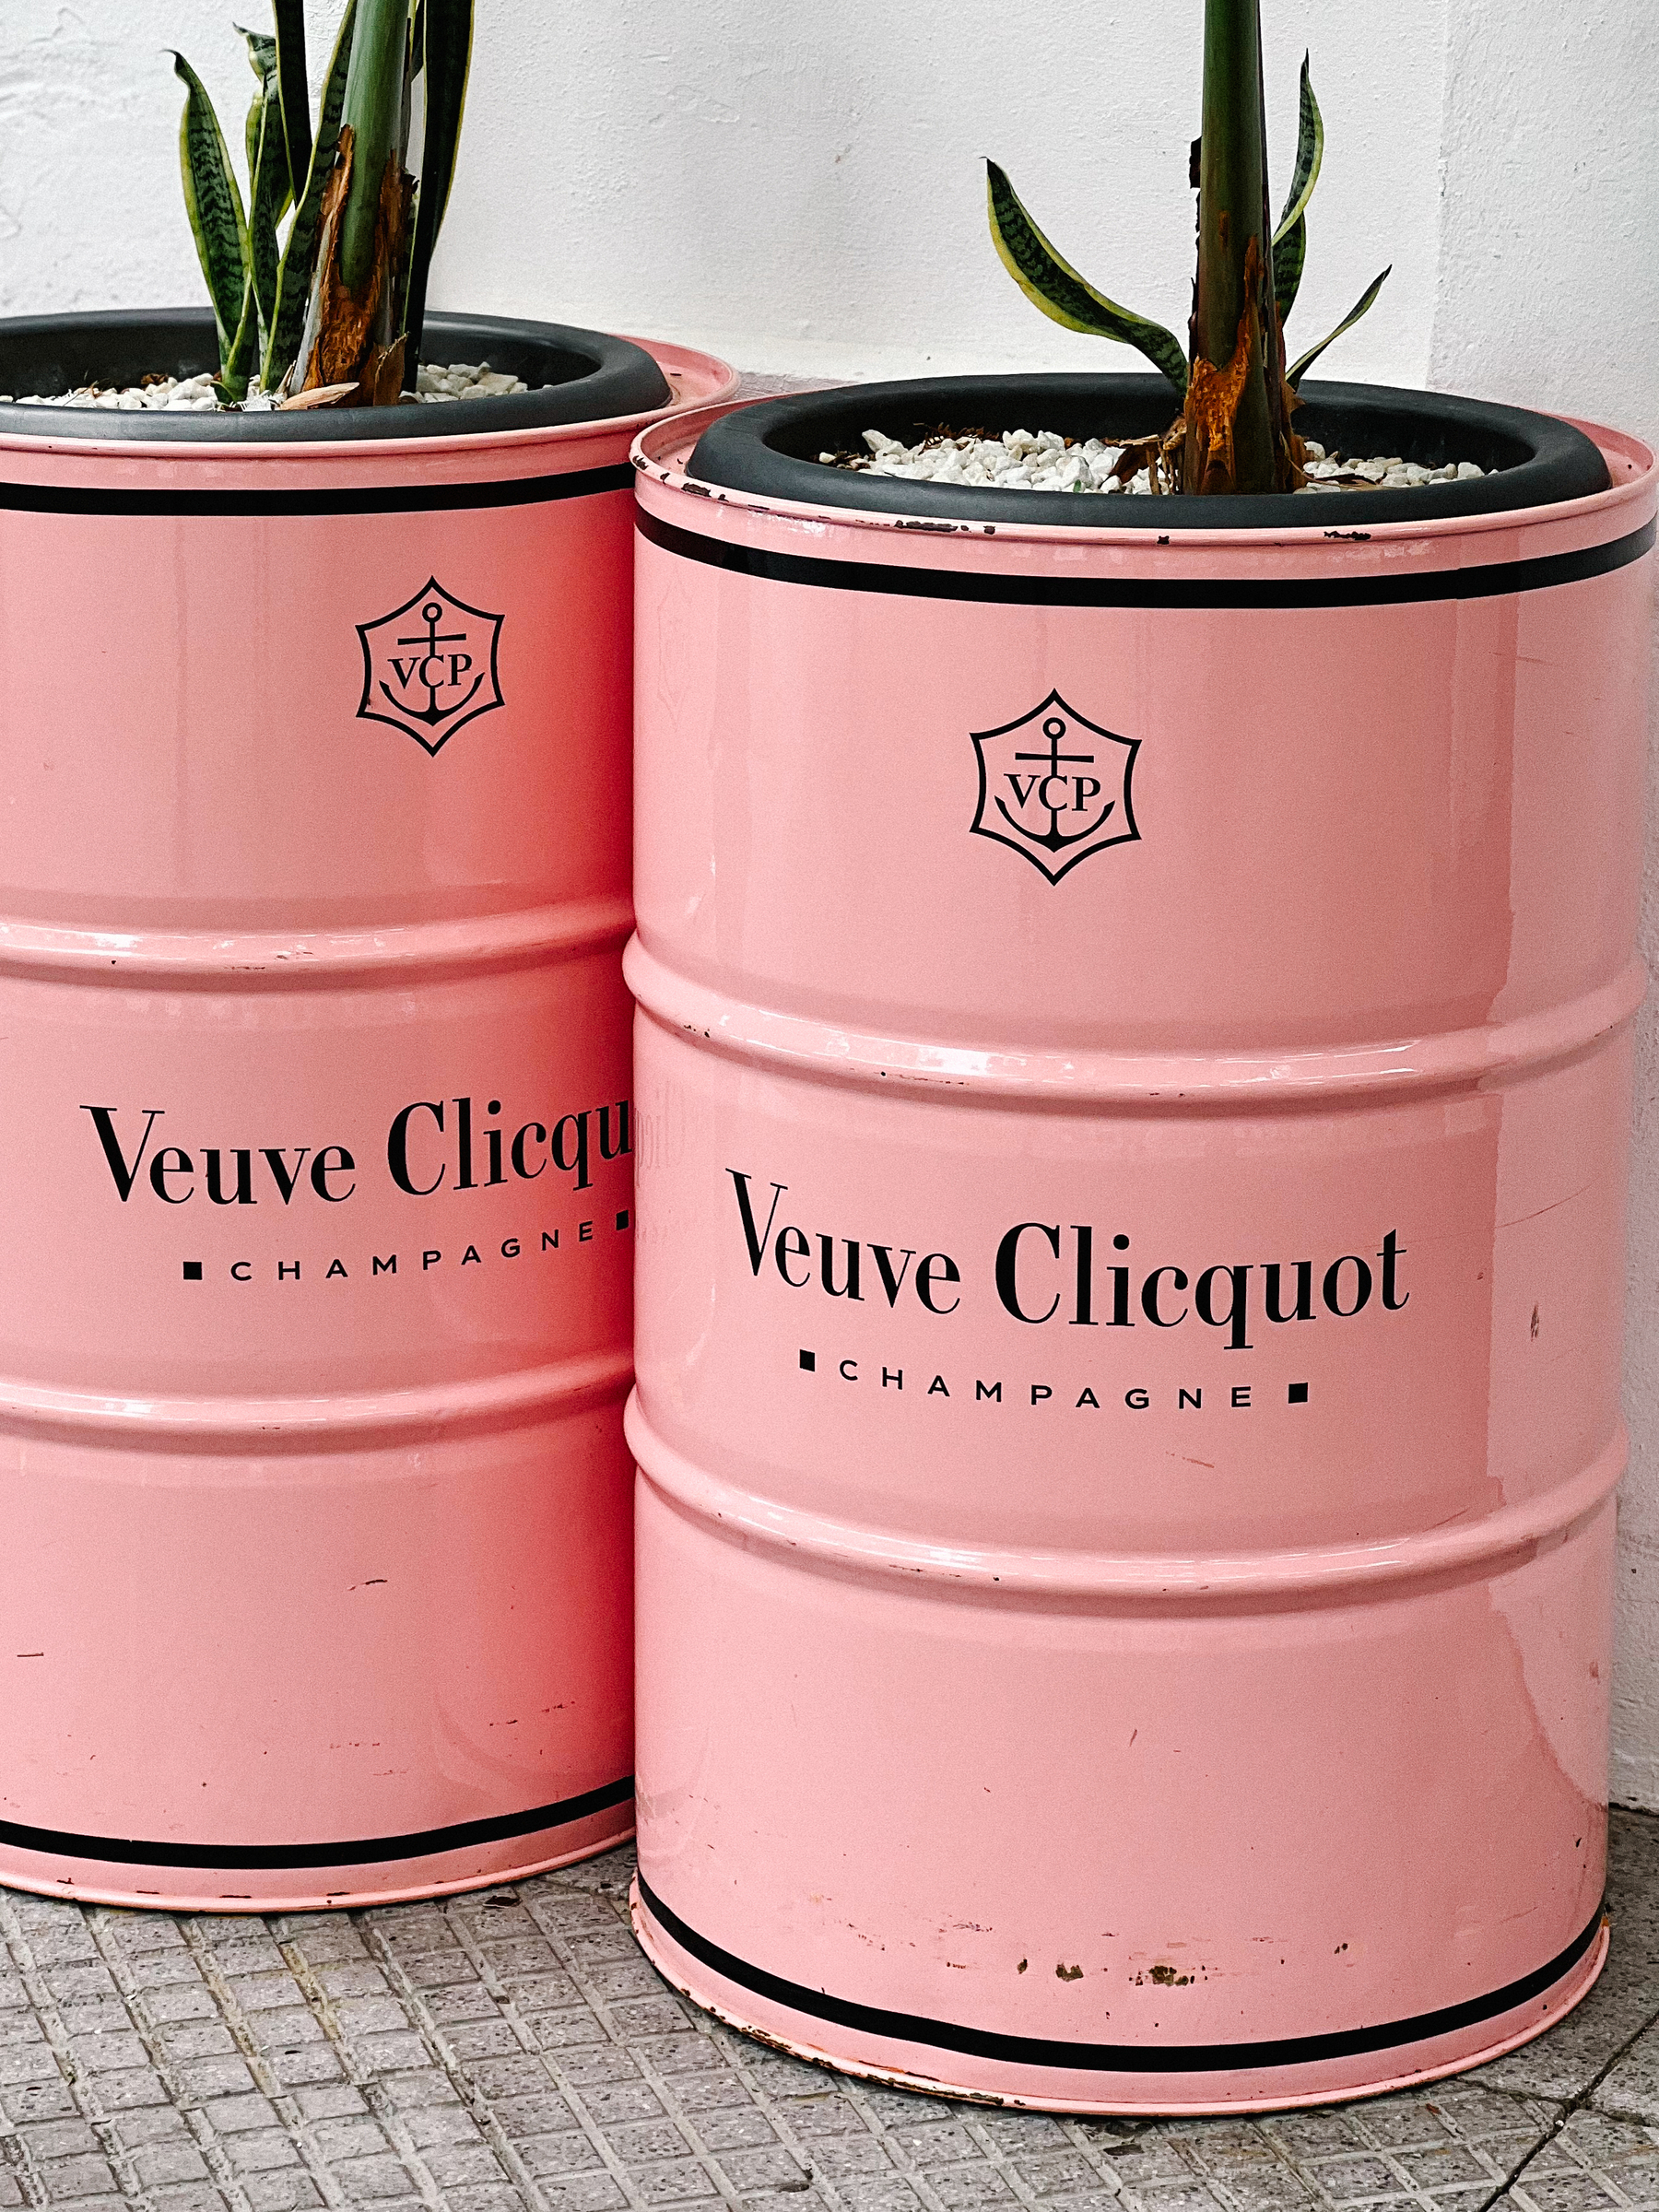 Two pink barrels with Veuve Clicquot written on them.